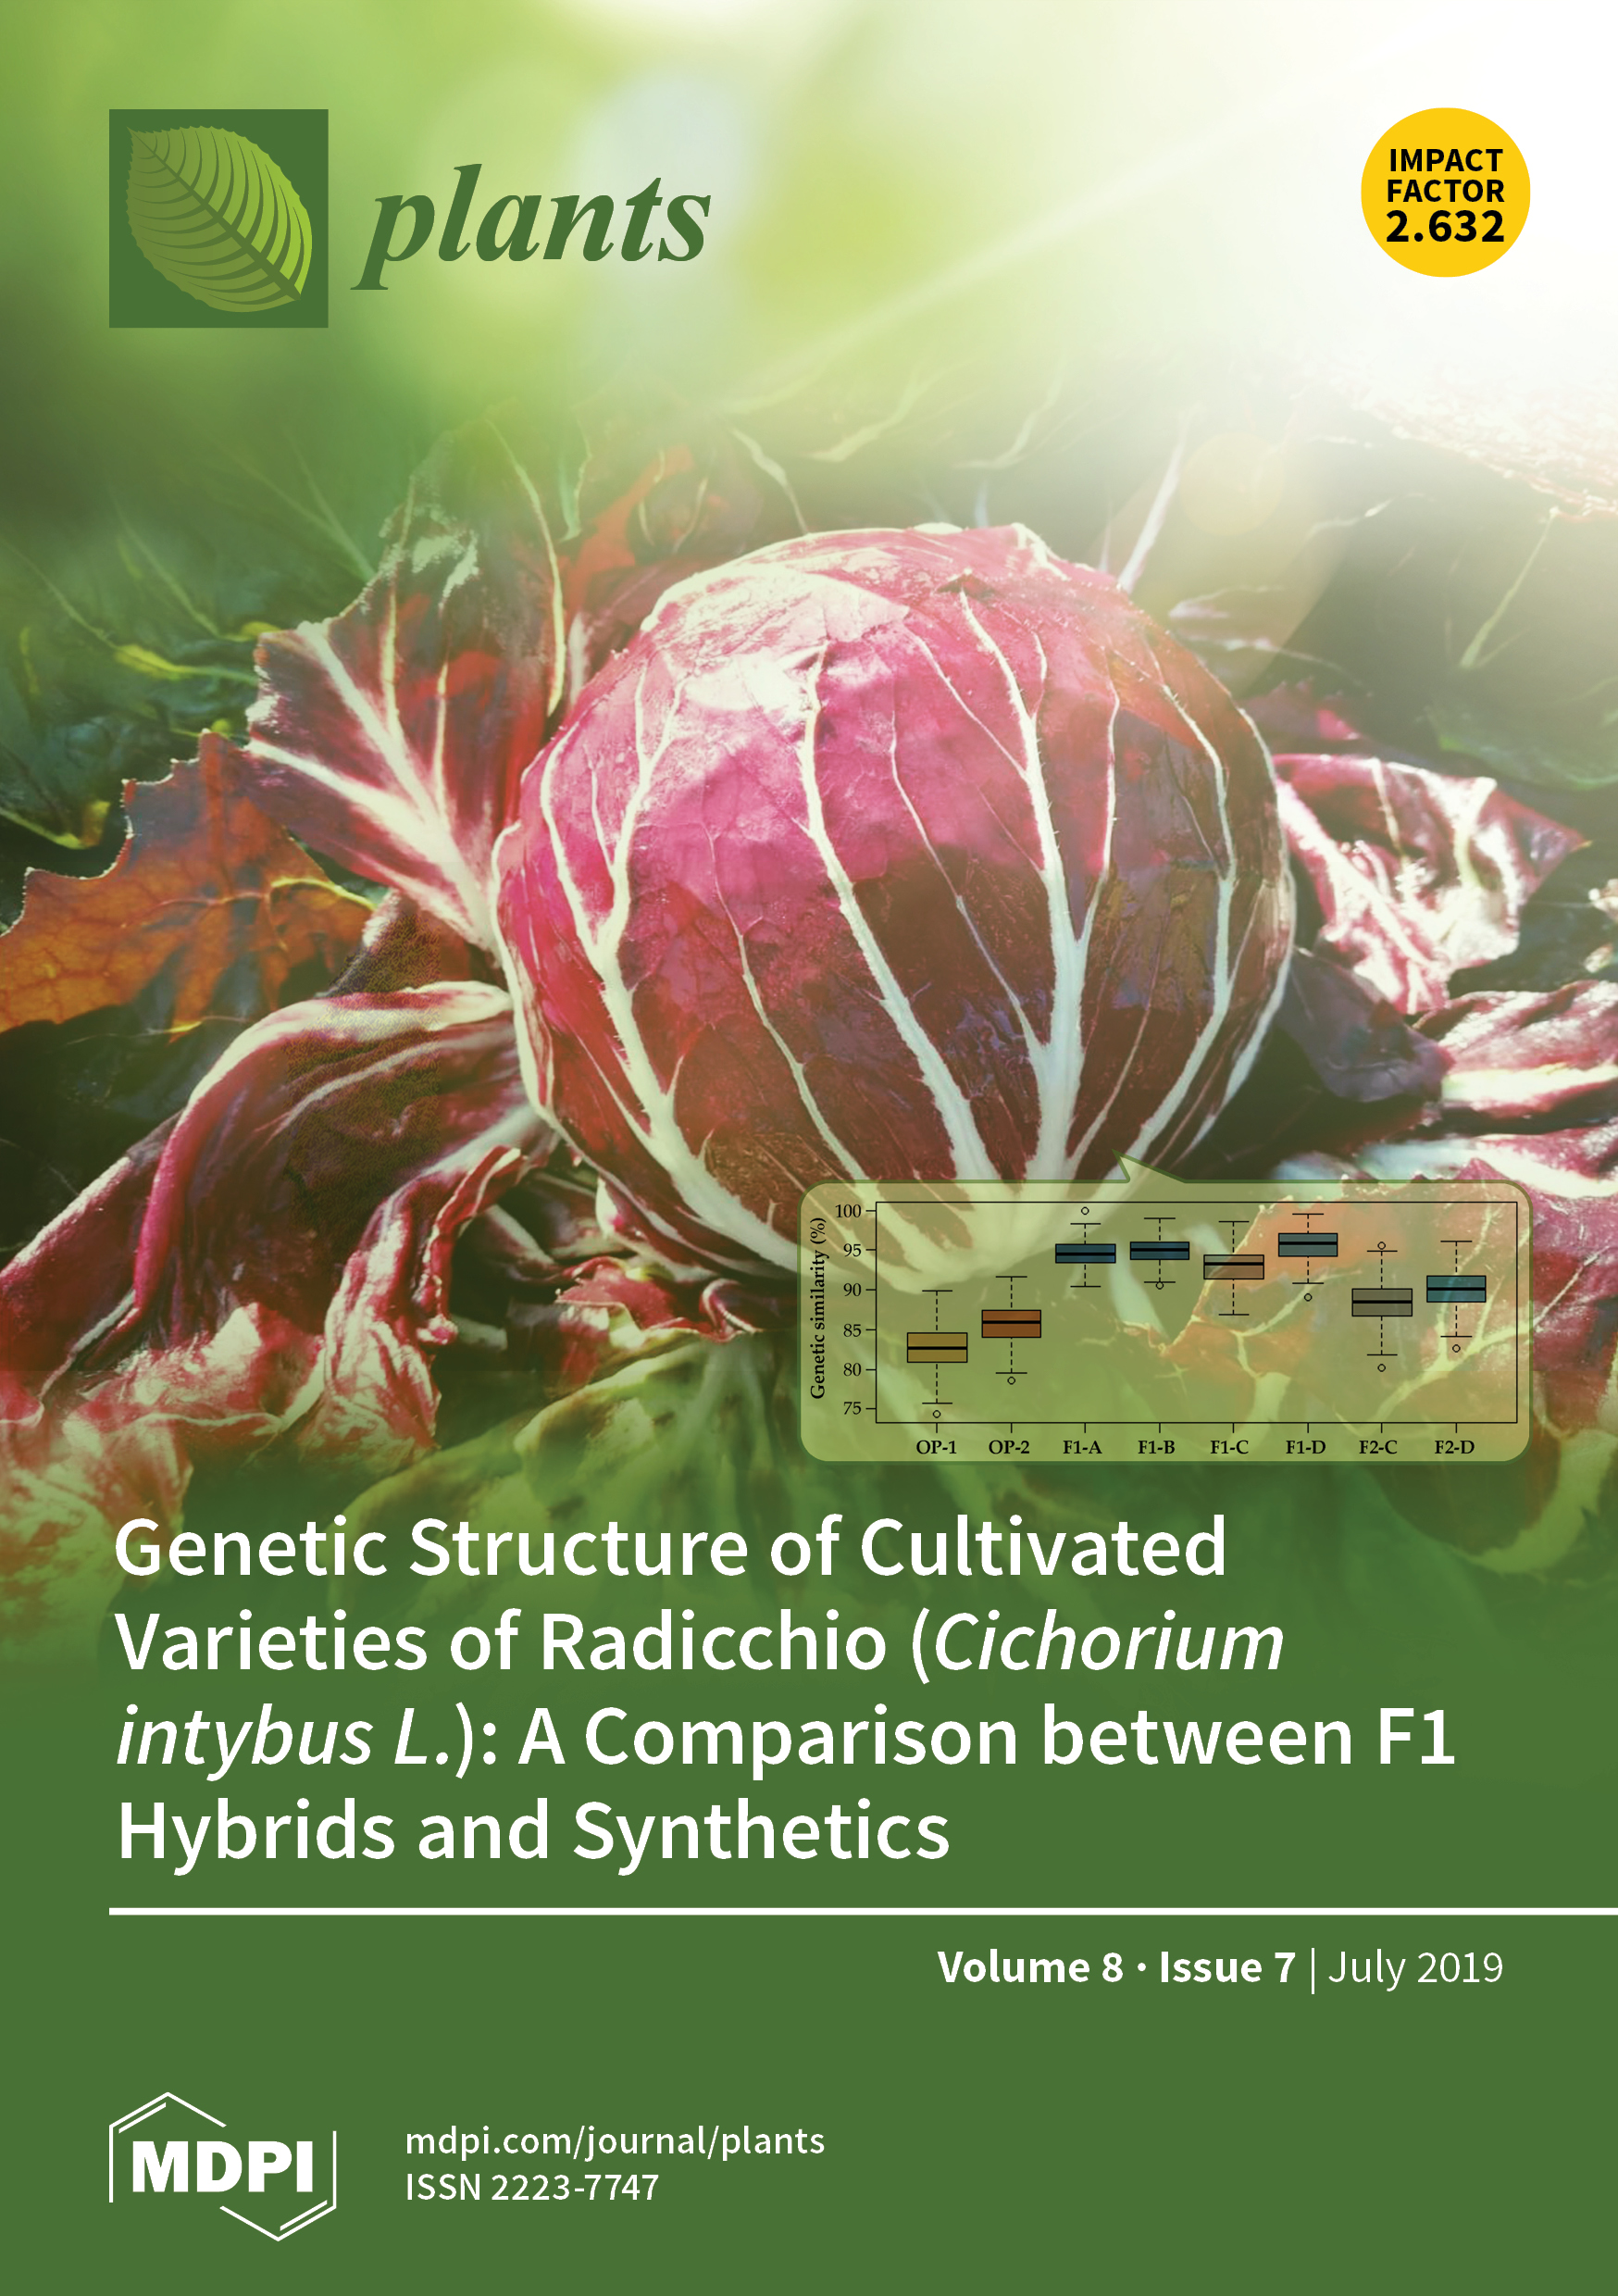 Genetic Structure of Cultivated Varieties of Radicchio (Cichorium intybus L.): A Comparison between F1 Hybrids and Synthetics